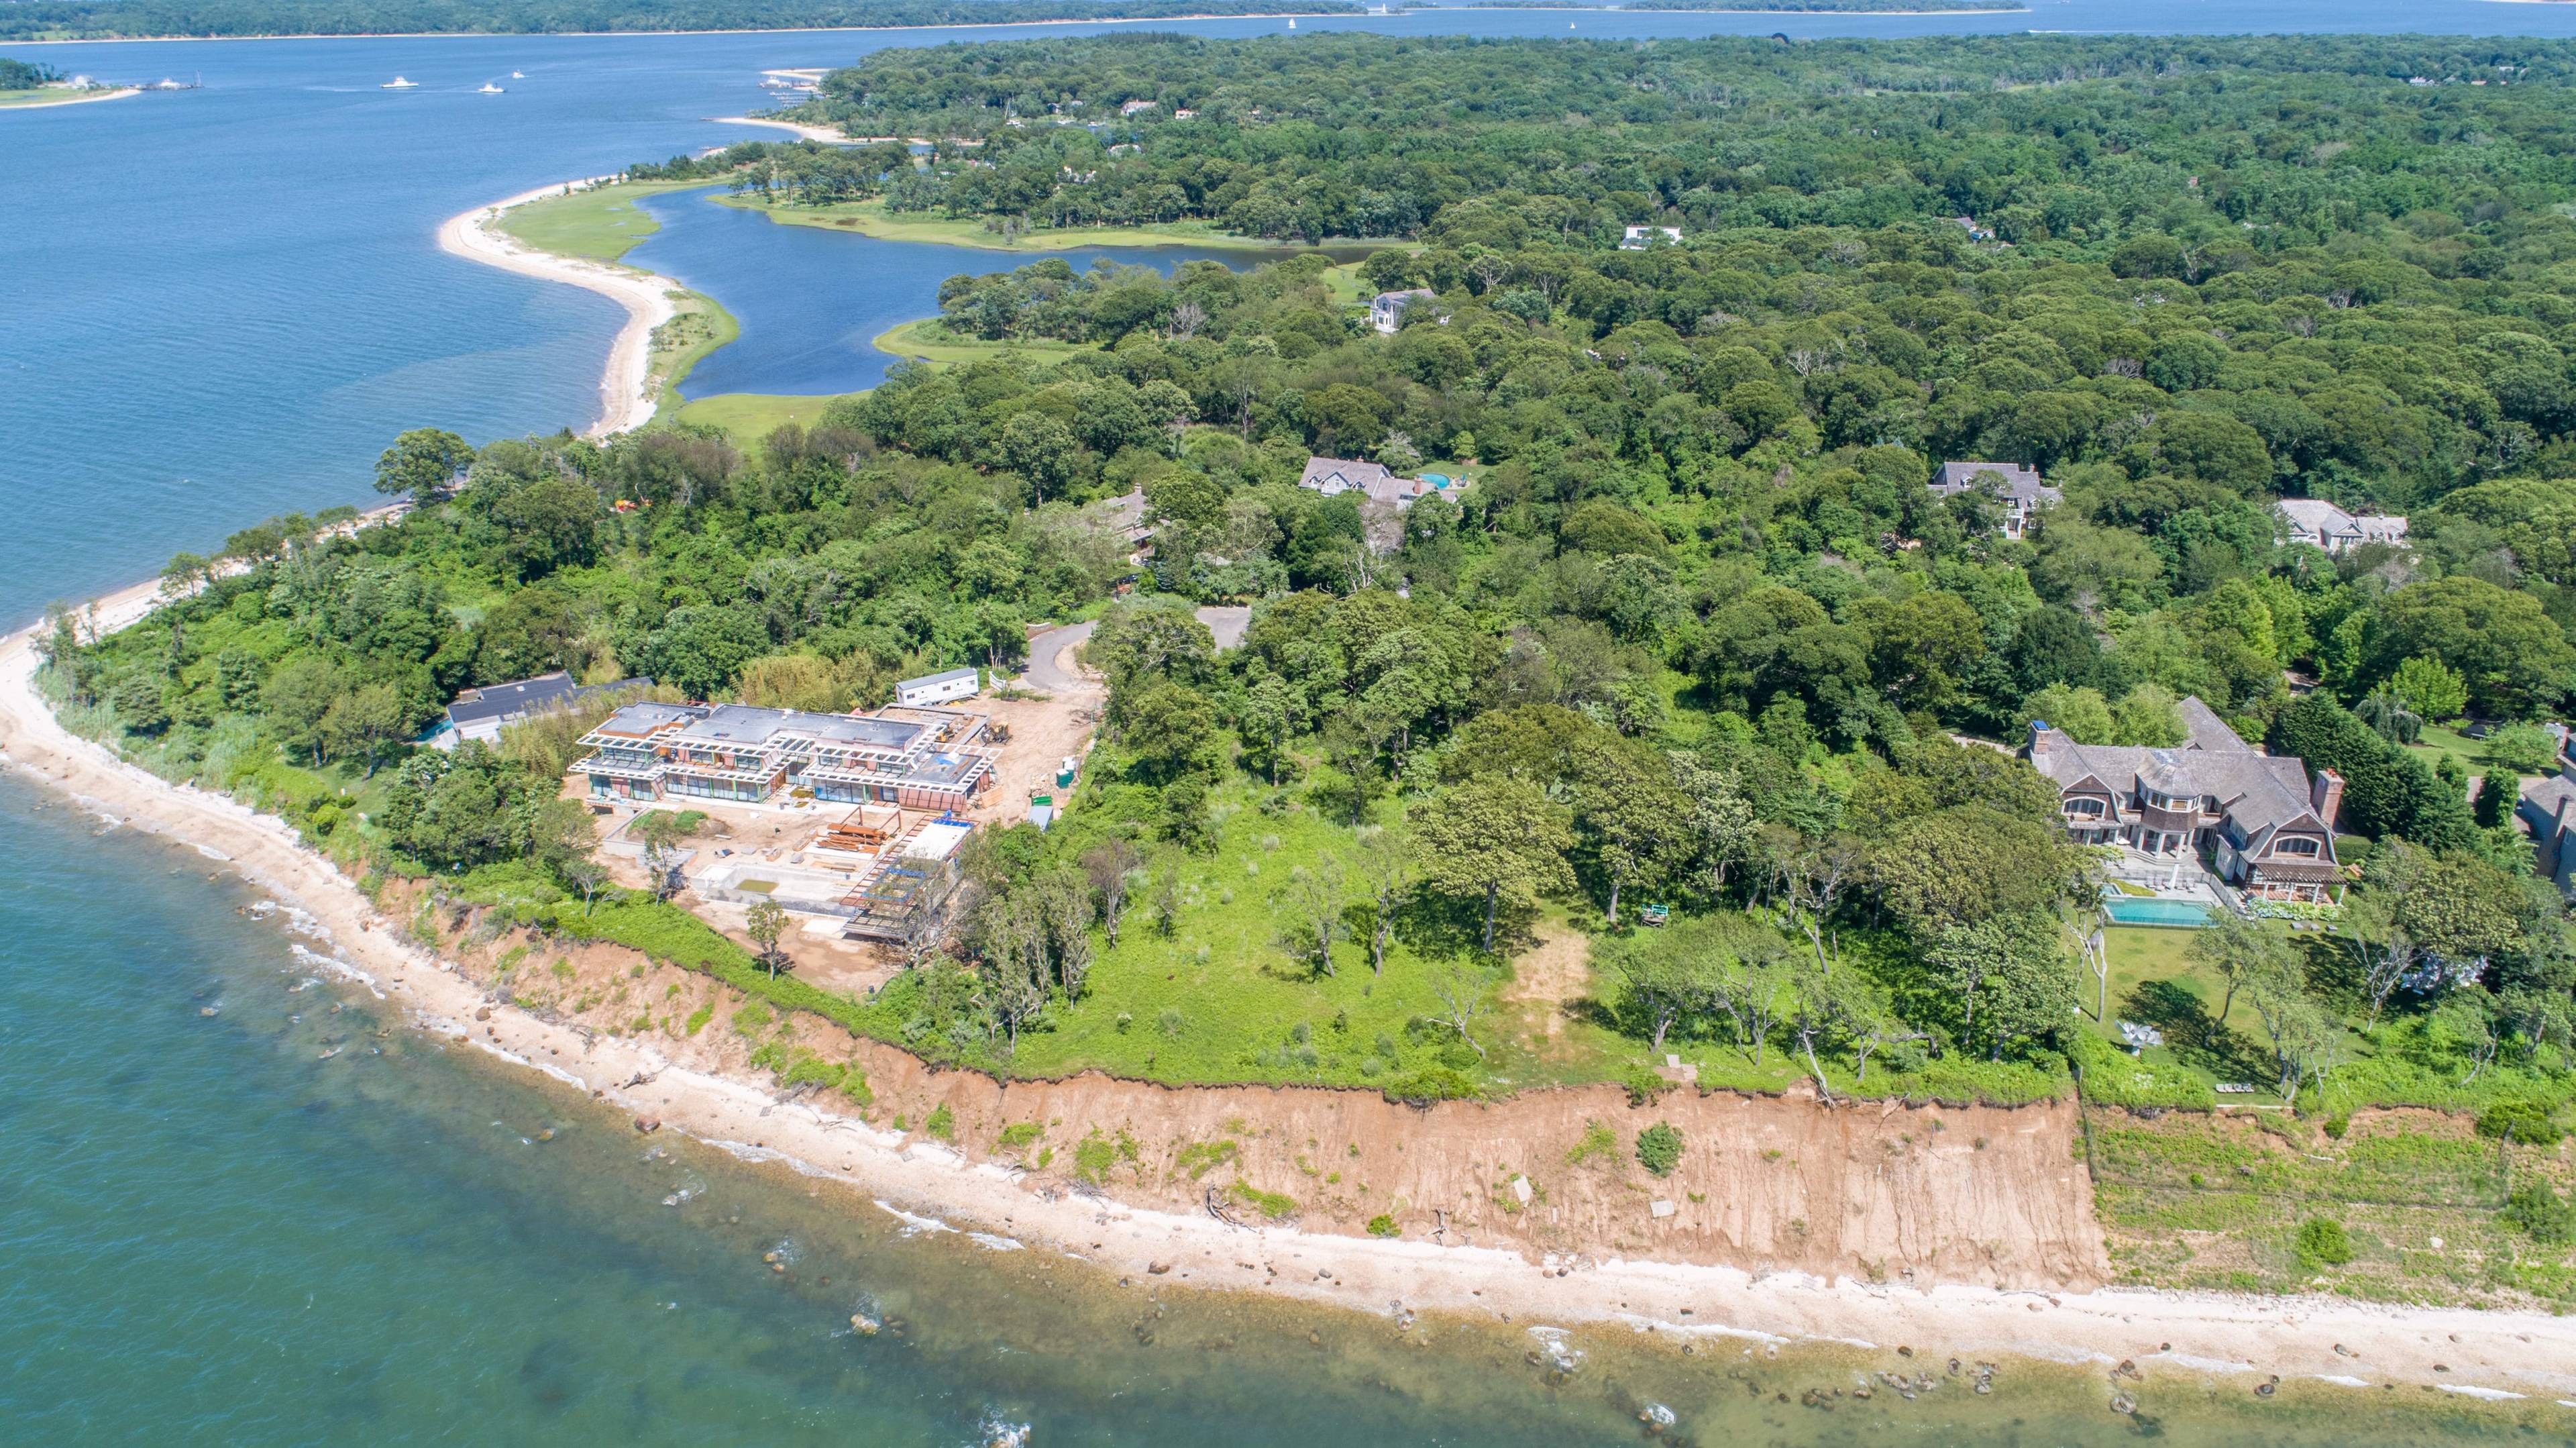 Awe Inspiring Double Lot with Sweeping views. Situated on one of the worlds most valuable streets,  atop 50 ft Cliffs that oversee the Peconic Bay, Sag Harbor & Shelter Island